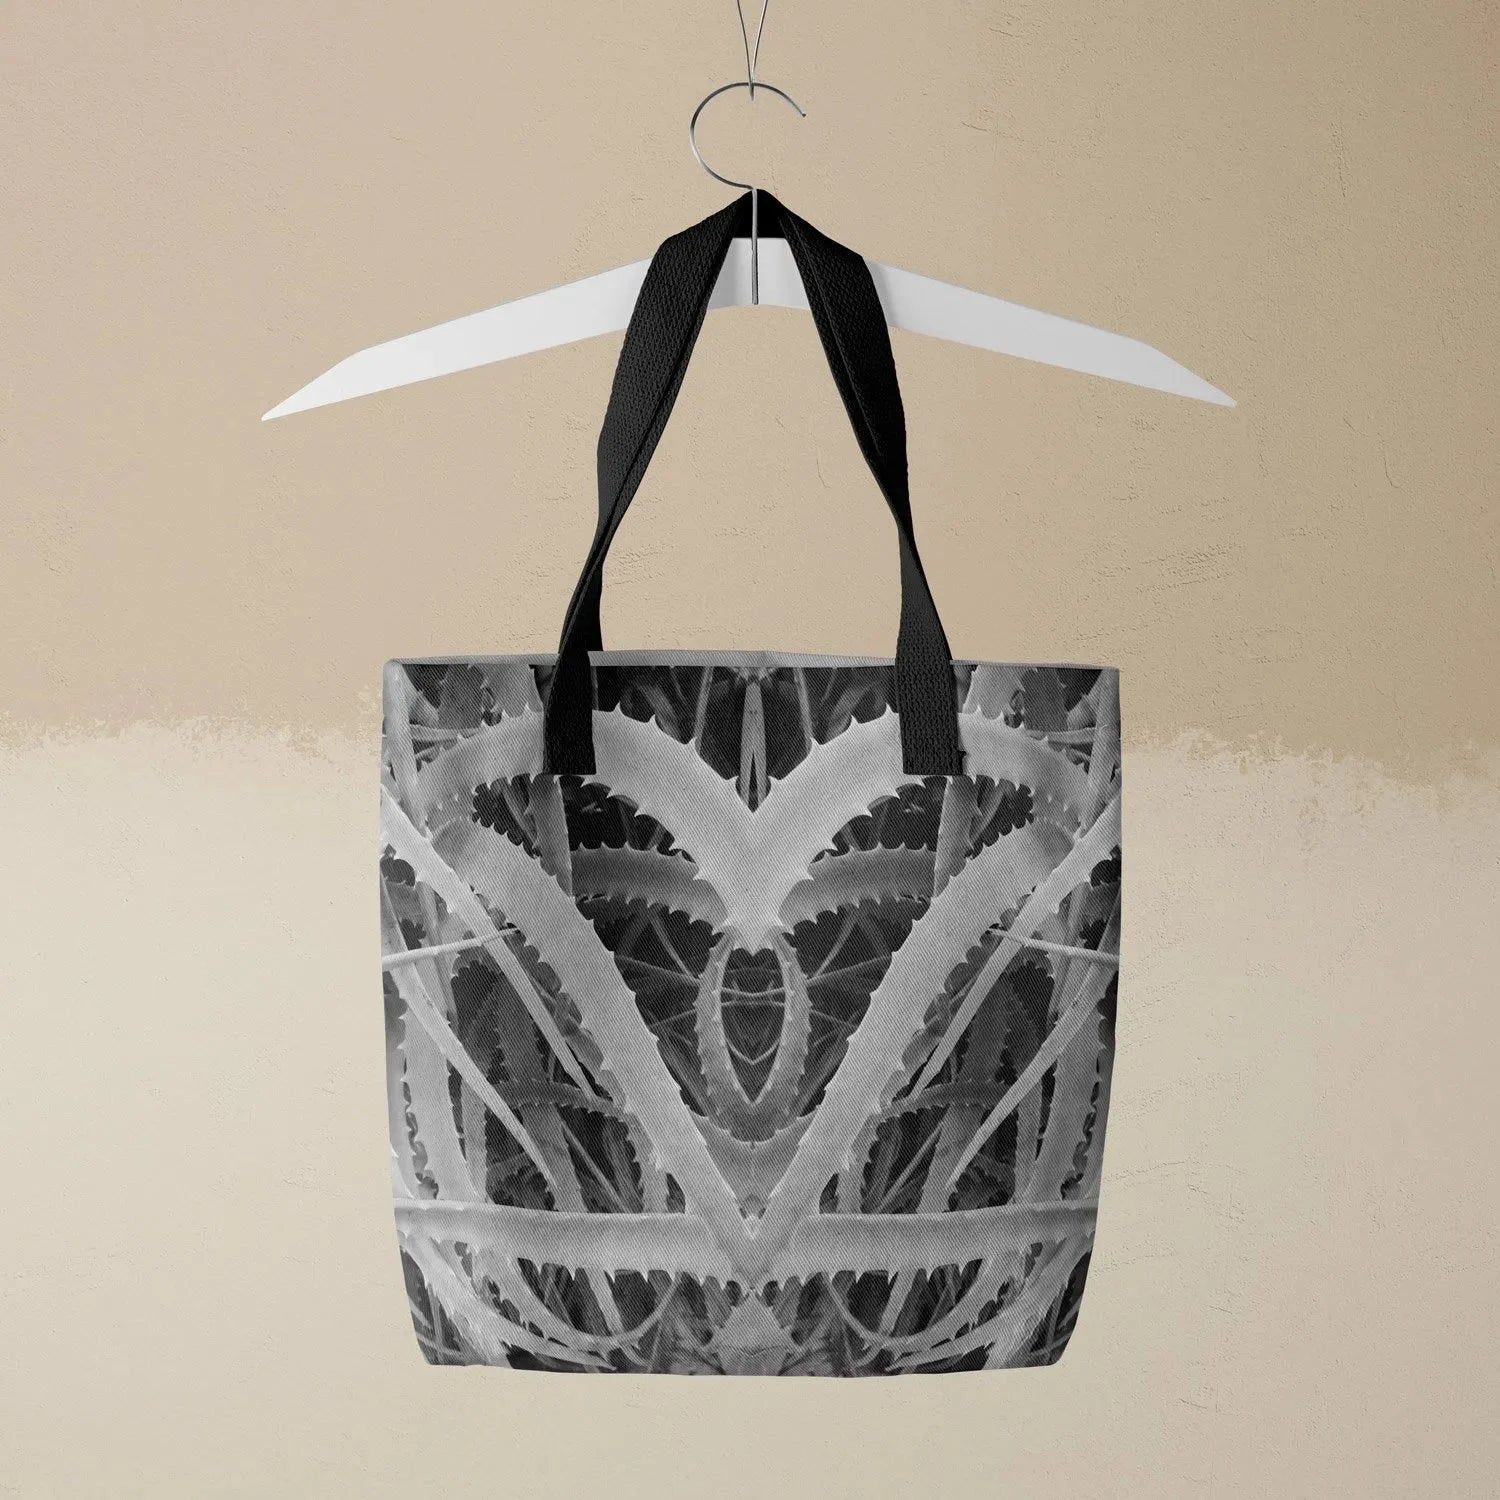 Spiked Tote - Black And White - Heavy Duty Reusable Grocery Bag - Black Handles - Shopping Totes - Aesthetic Art